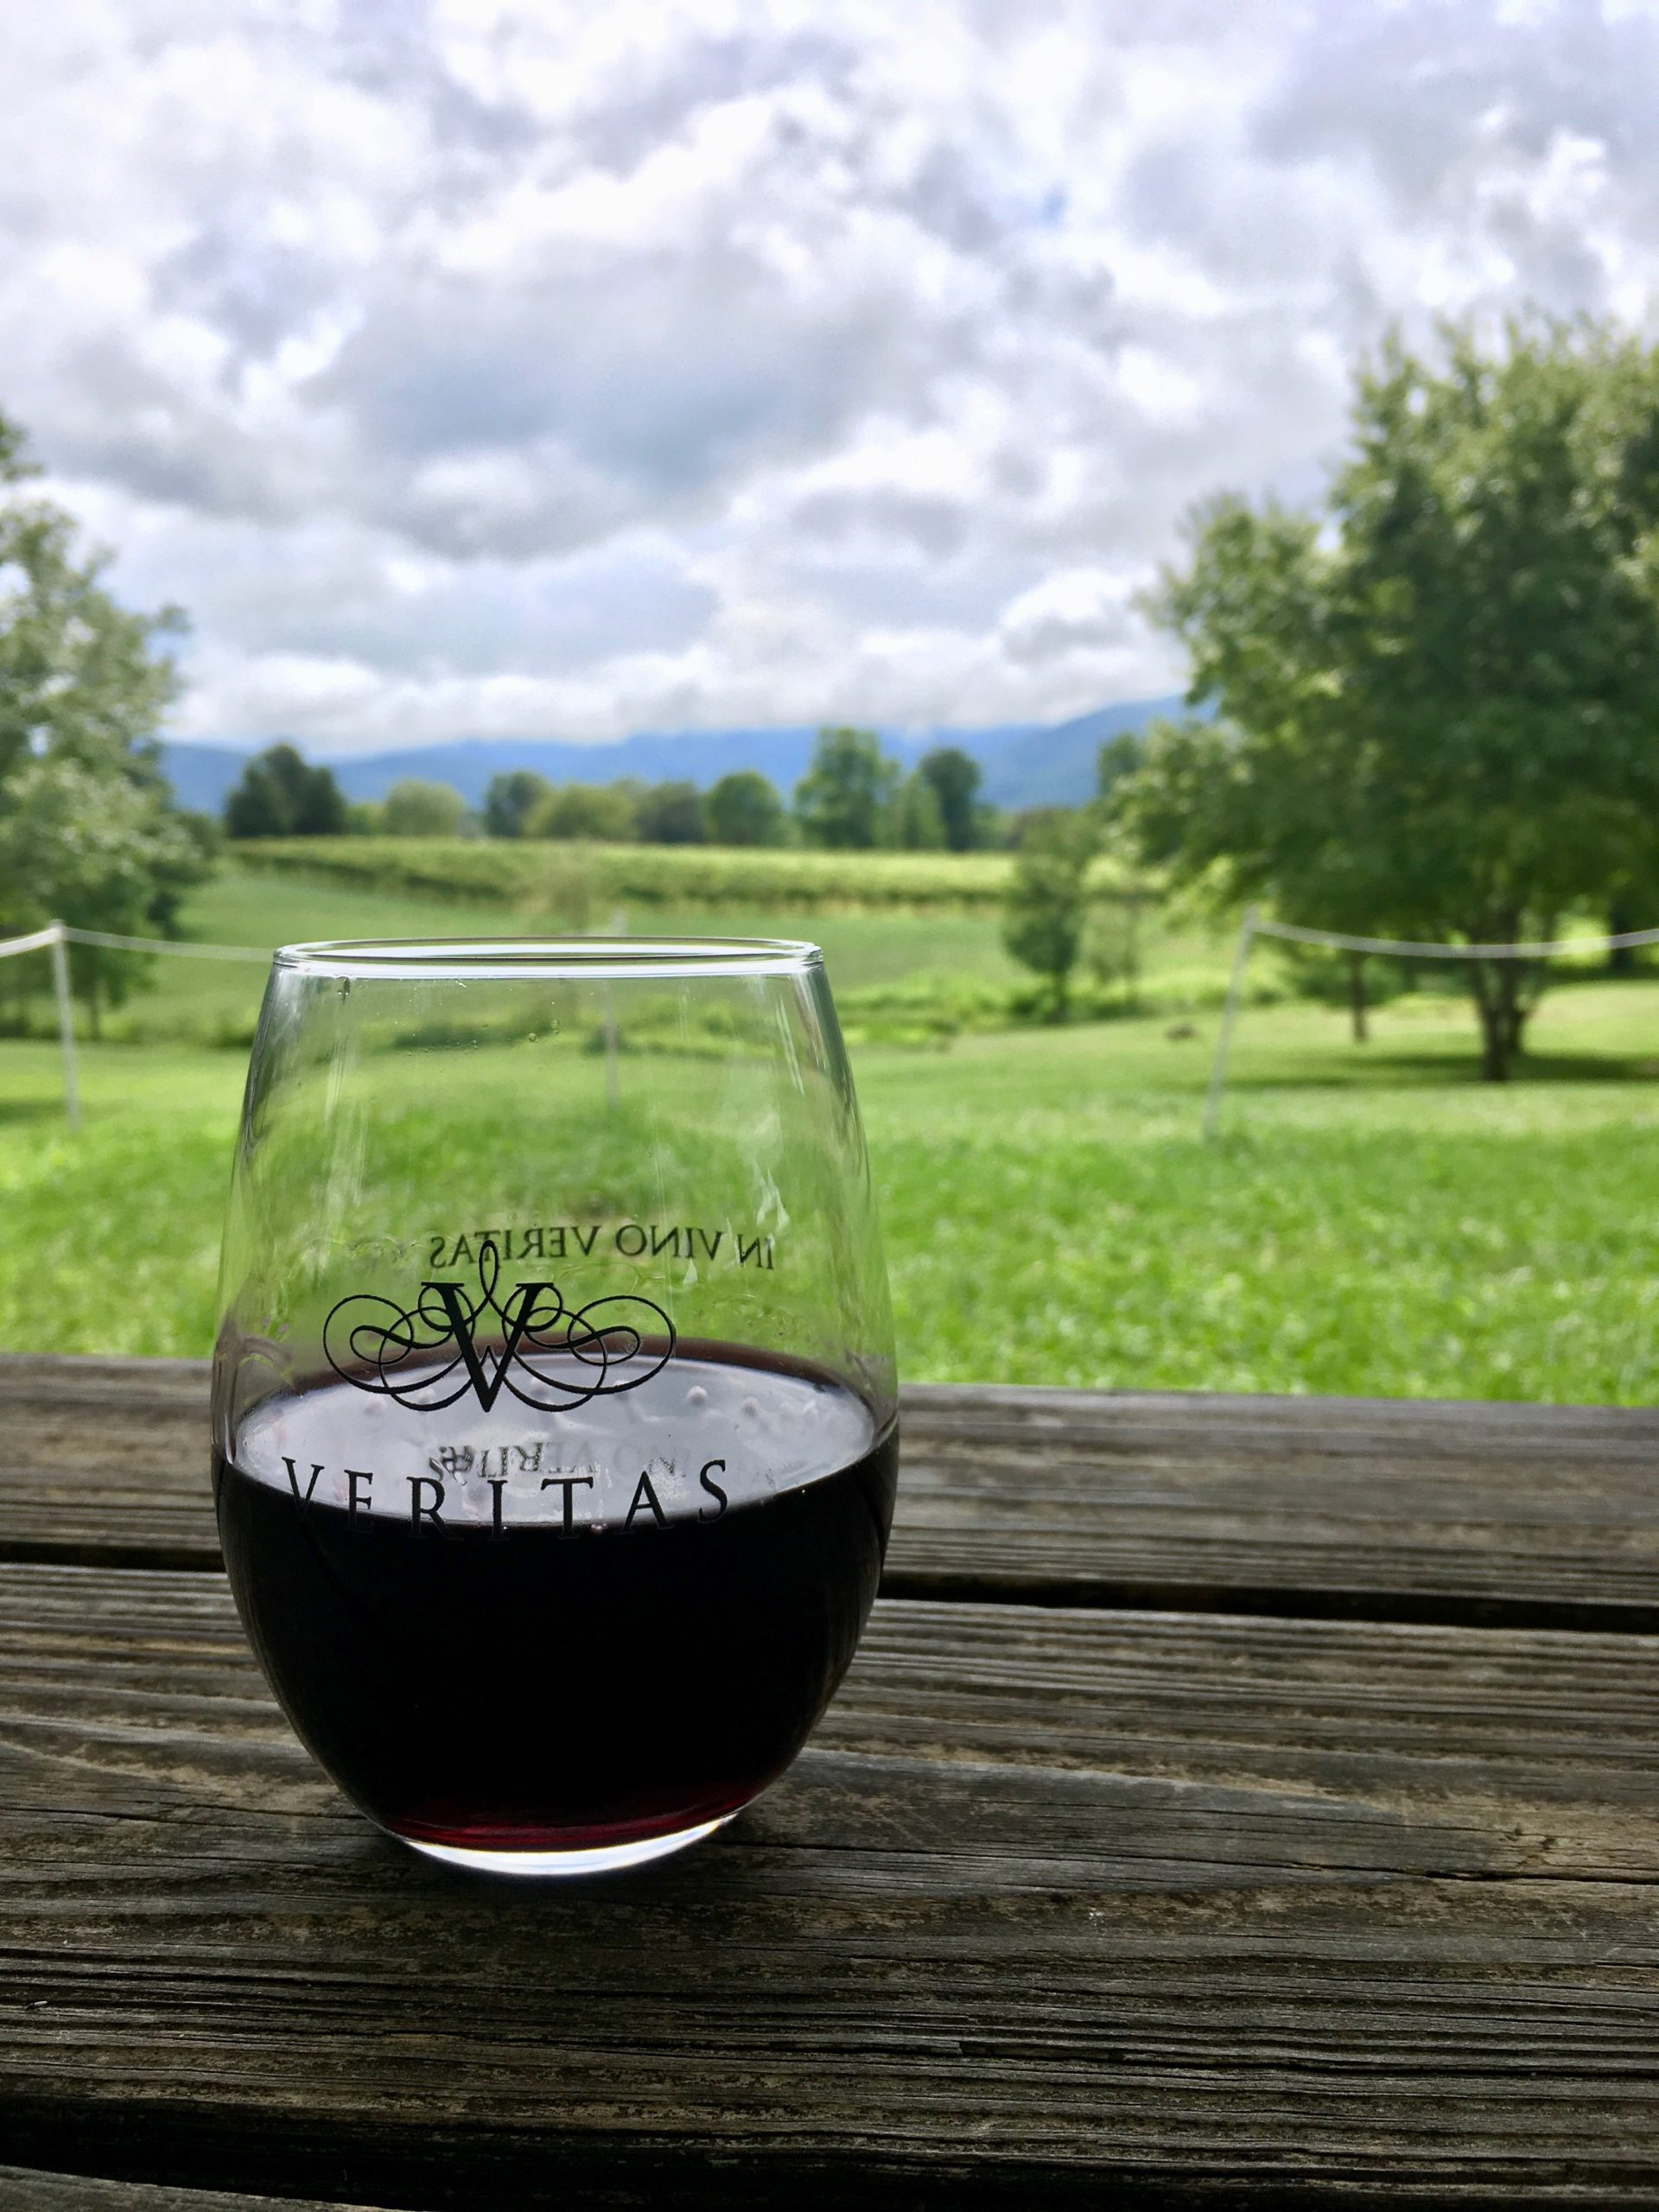 A glass of red wine on a picnic table with green vineyards in the background at Veritas Vineyards